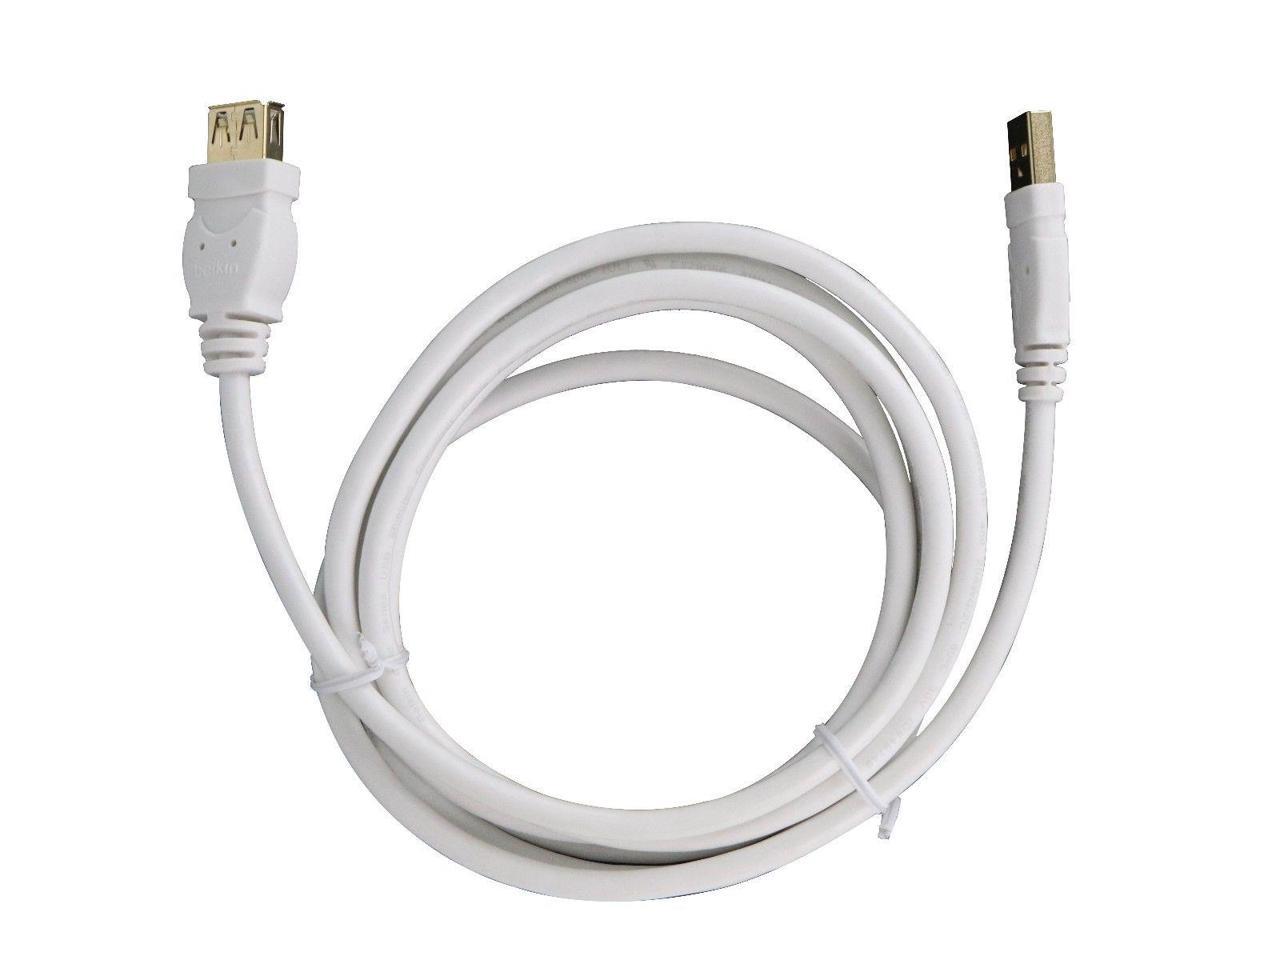 Belkin Universal 6Ft A/A Male USB to Female USB 1.0 Data Extension Cable - White